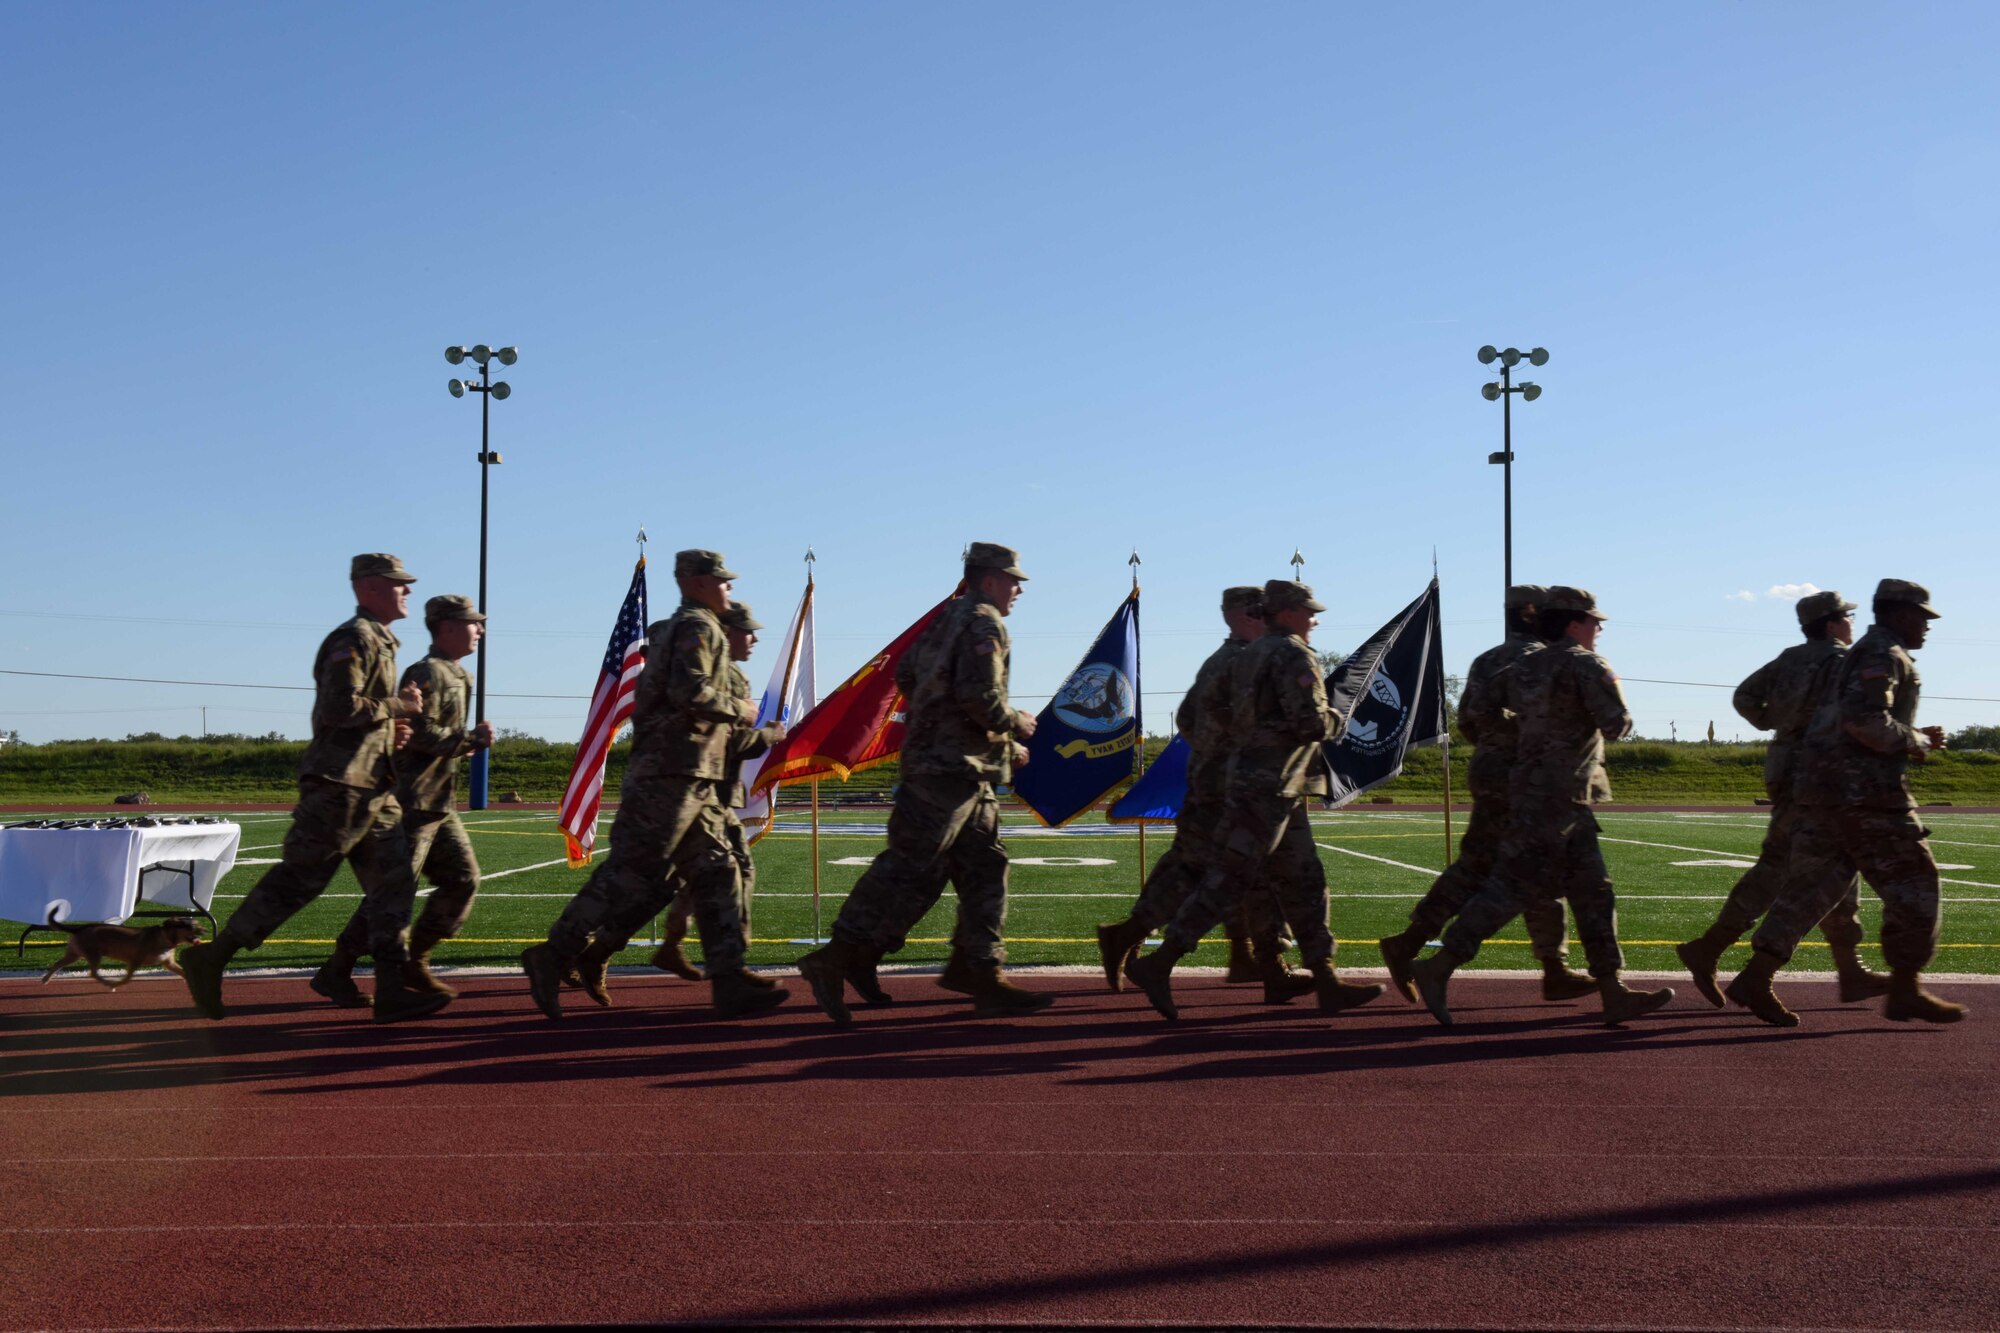 Soldiers from Goodfellow Air Force Base run during the 24-hour Prisoners of War and Missing in Action Vigil at the track on Goodfellow AFB, Texas, Oct. 27, 2018. Members from the base and San Angelo participated in the run to honor past and present prisoners of war and military members missing in action. (U.S. Air Force photo by Senior Airman Randall Moose/Released)